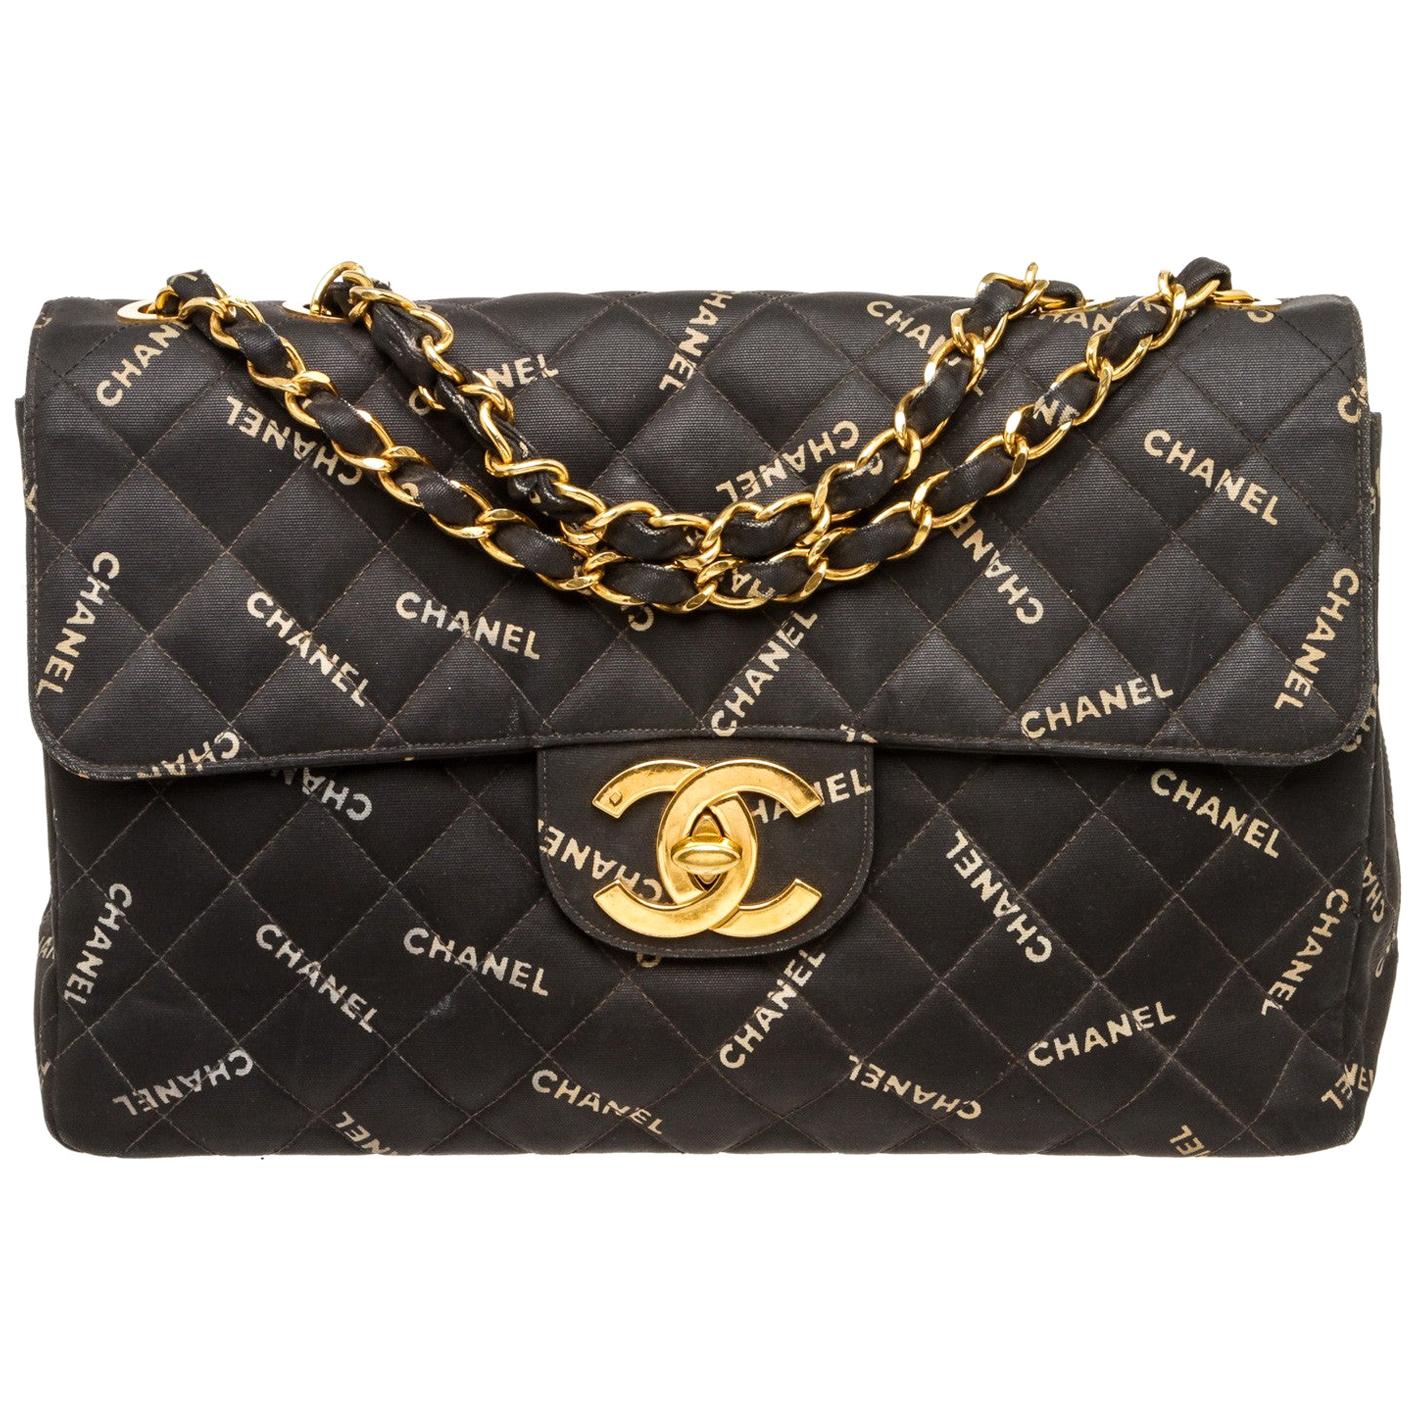 CHANEL Logo Chain Shoulder Tote Bag Canvas White Gold-Plated